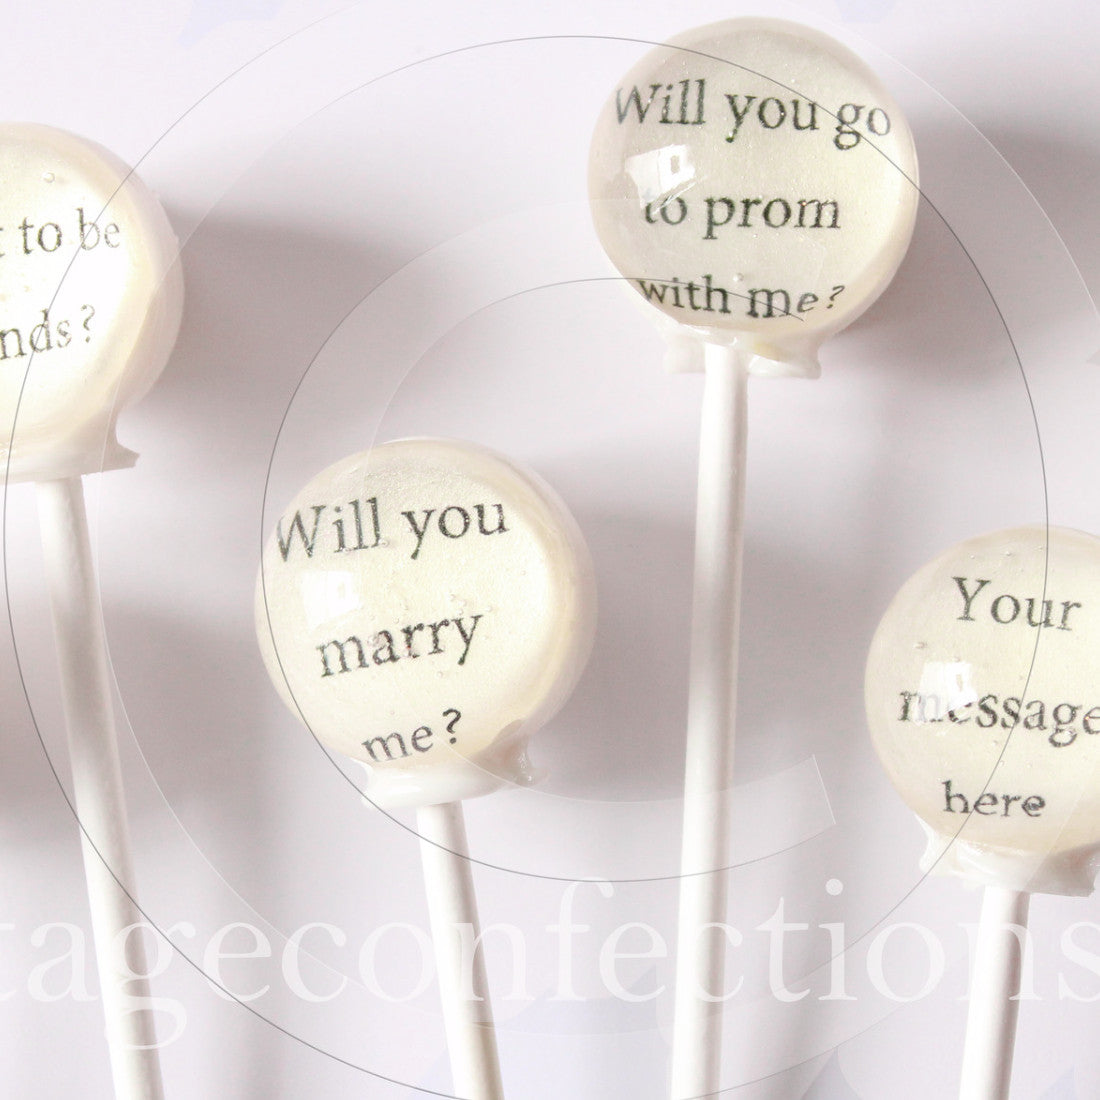 Mystery Message lollipops by Vintage Confections